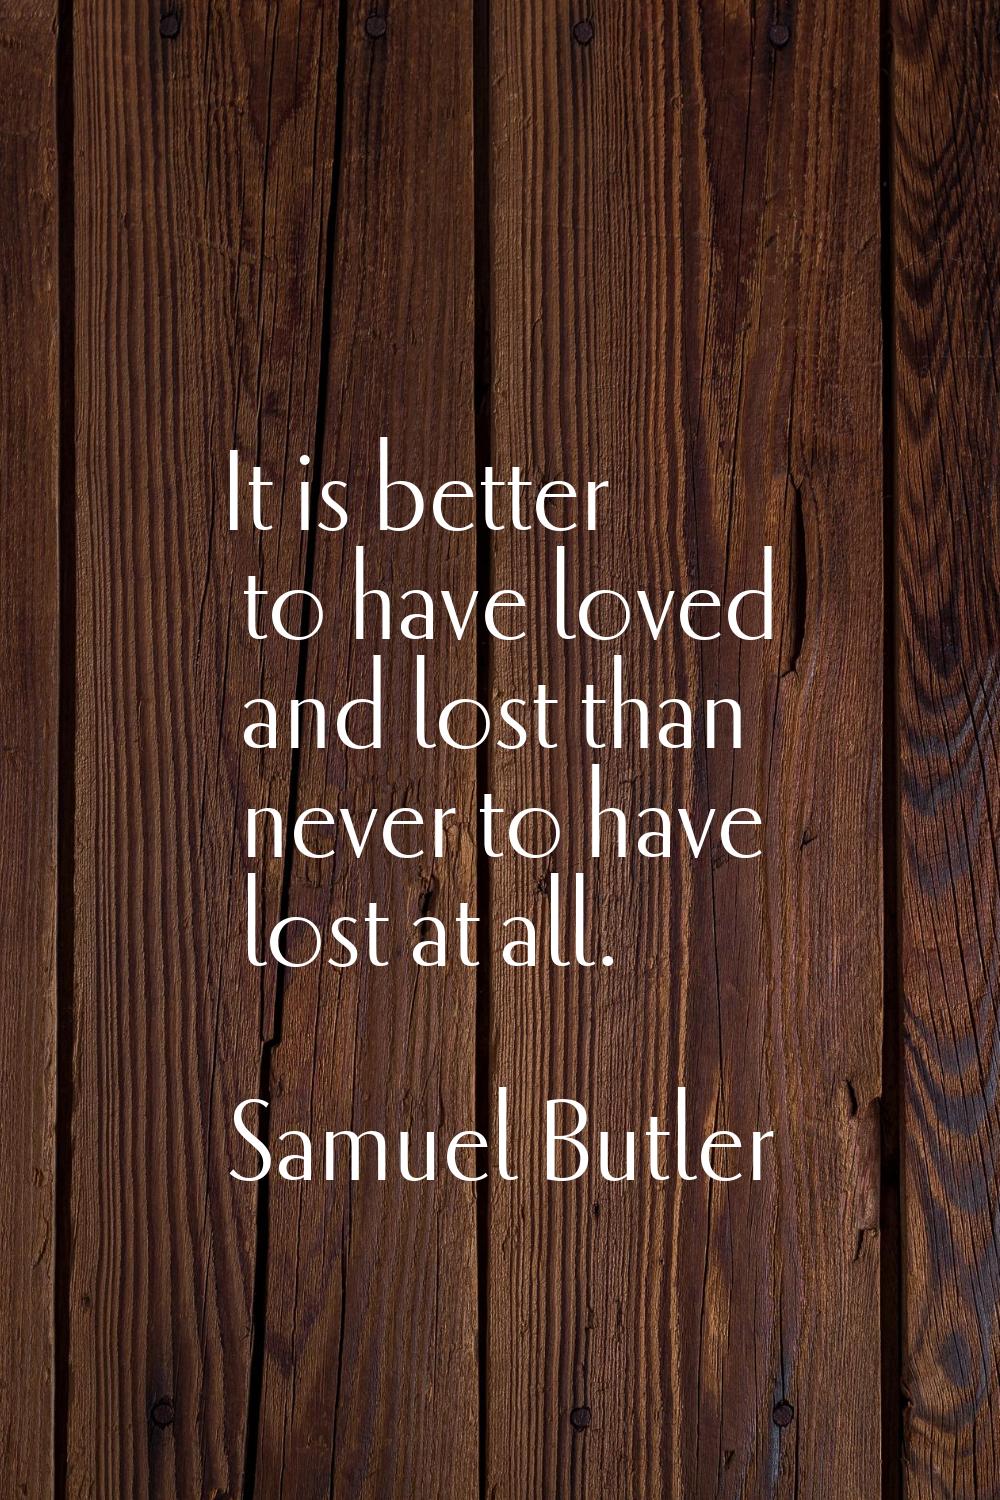 It is better to have loved and lost than never to have lost at all.